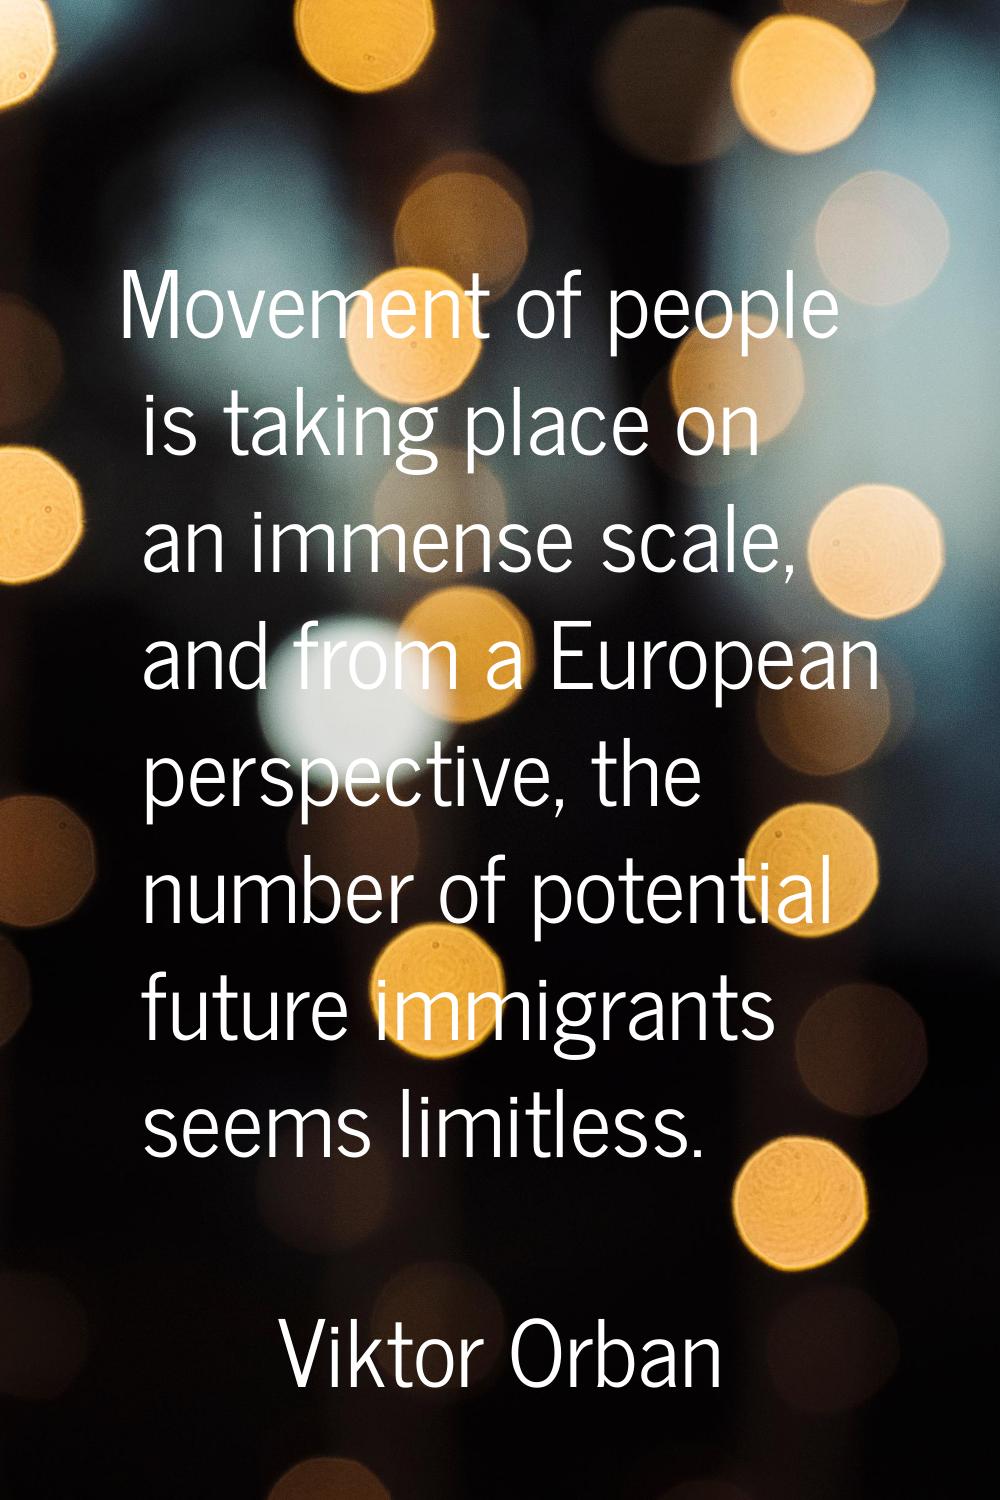 Movement of people is taking place on an immense scale, and from a European perspective, the number